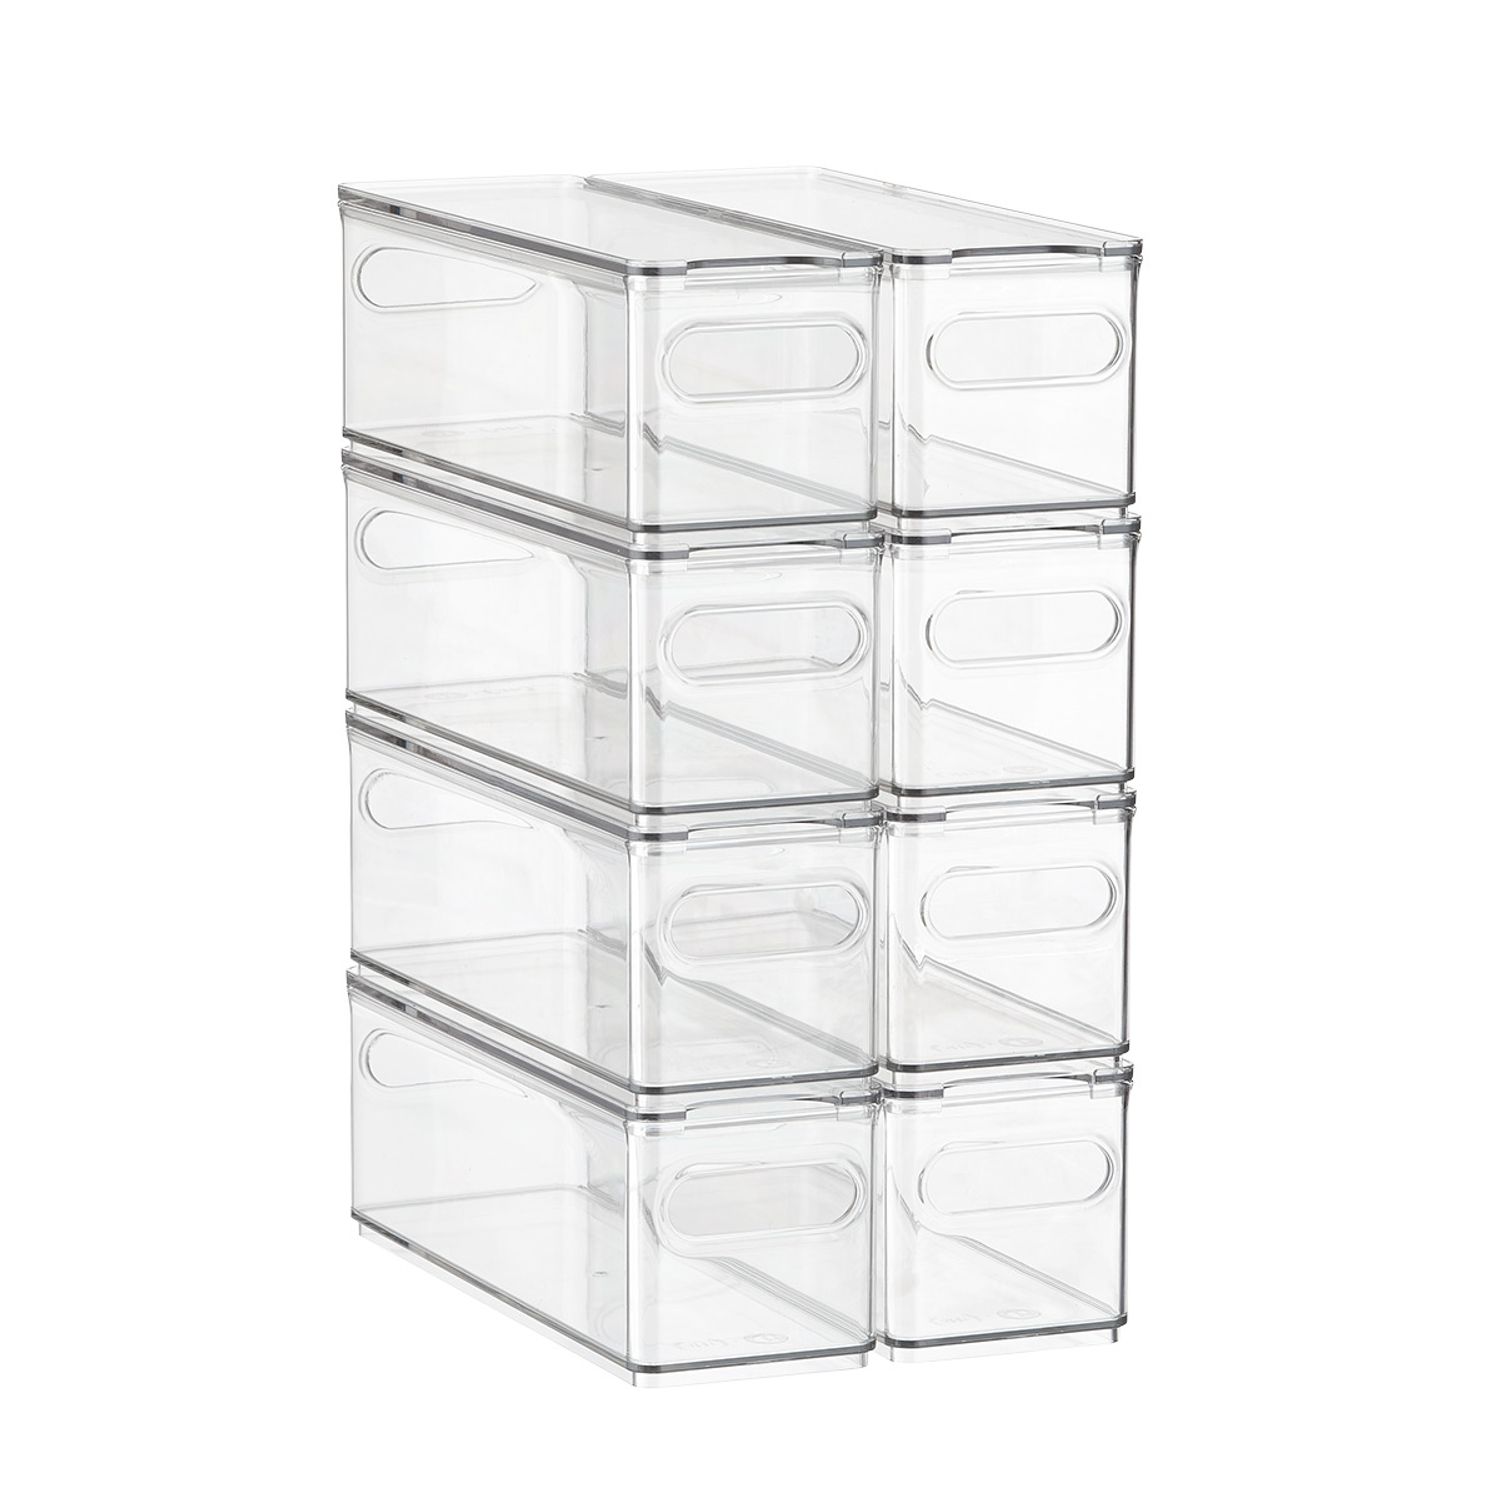 Shop The Home Edit Narrow Fridge Bins from The Container Store on Openhaus